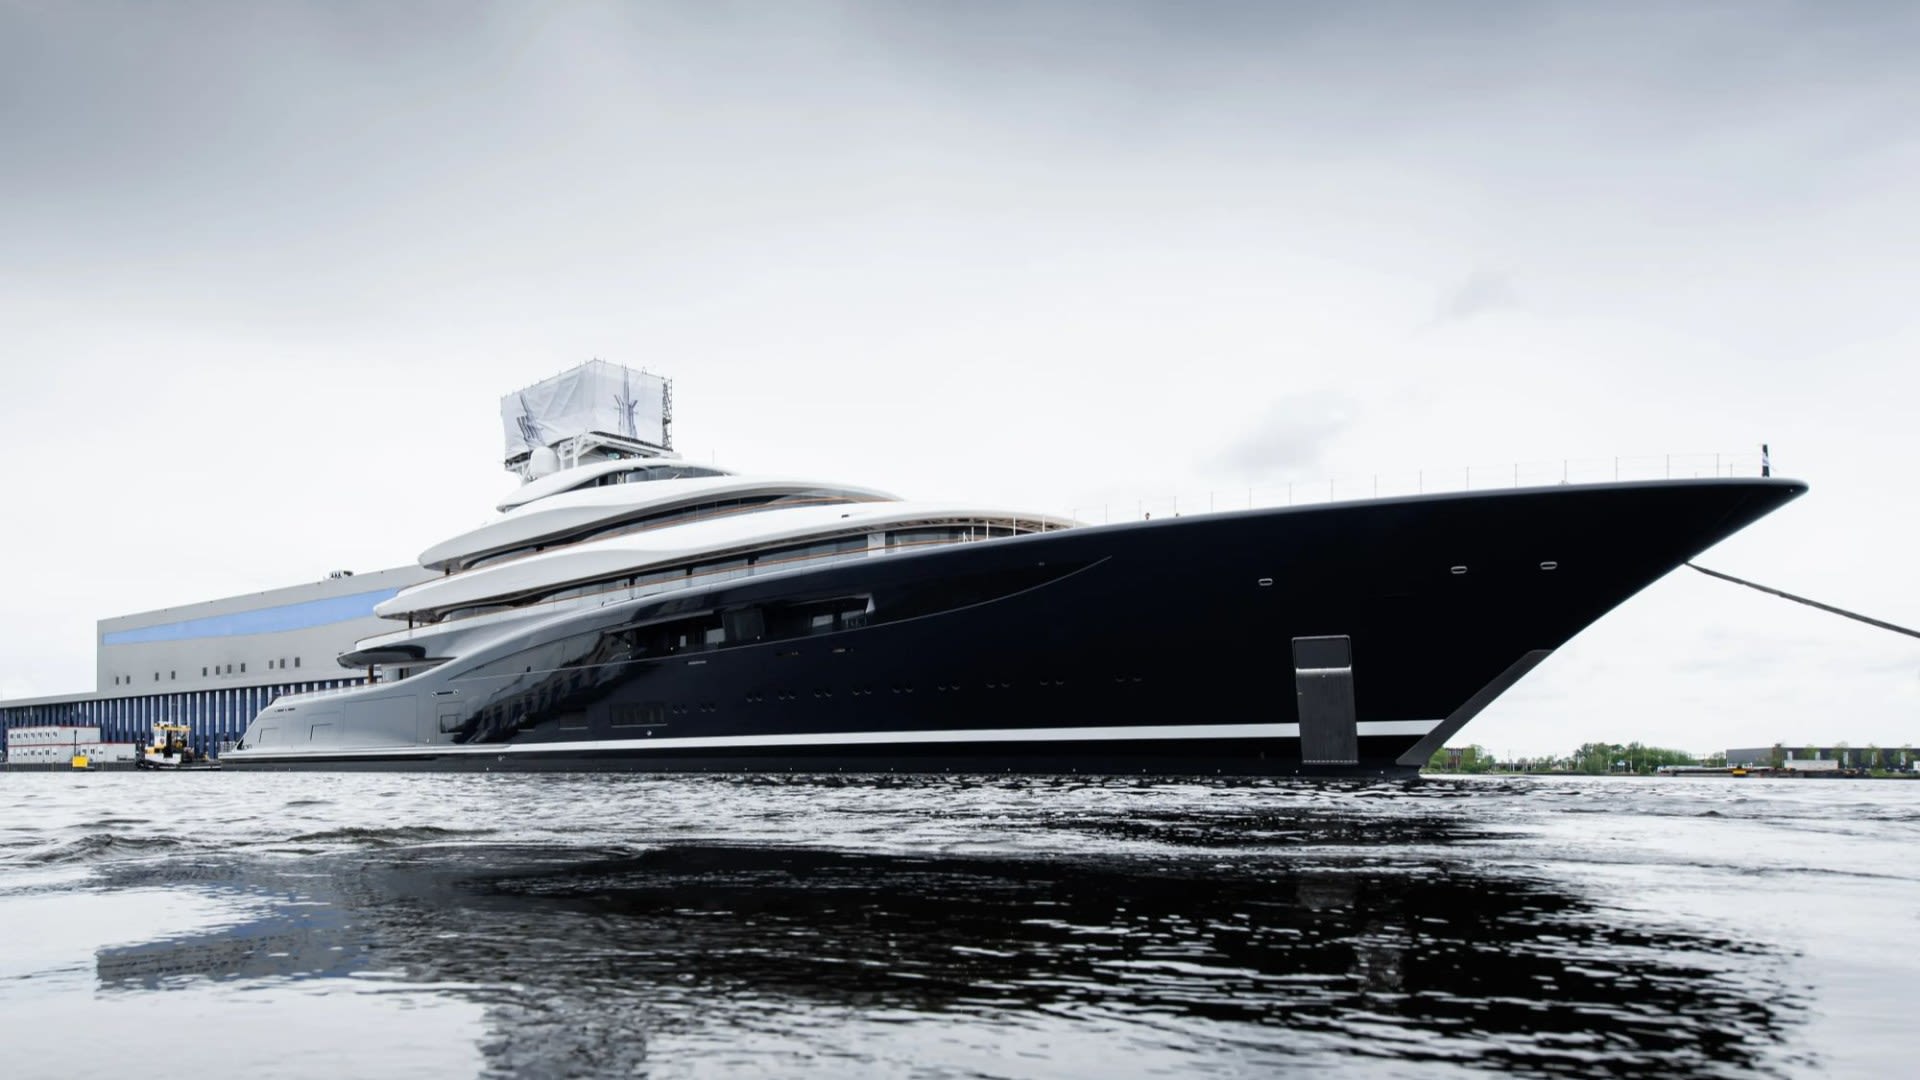 World’s 1st hydrogen-powered 400ft long superyacht goes for sale for £515m